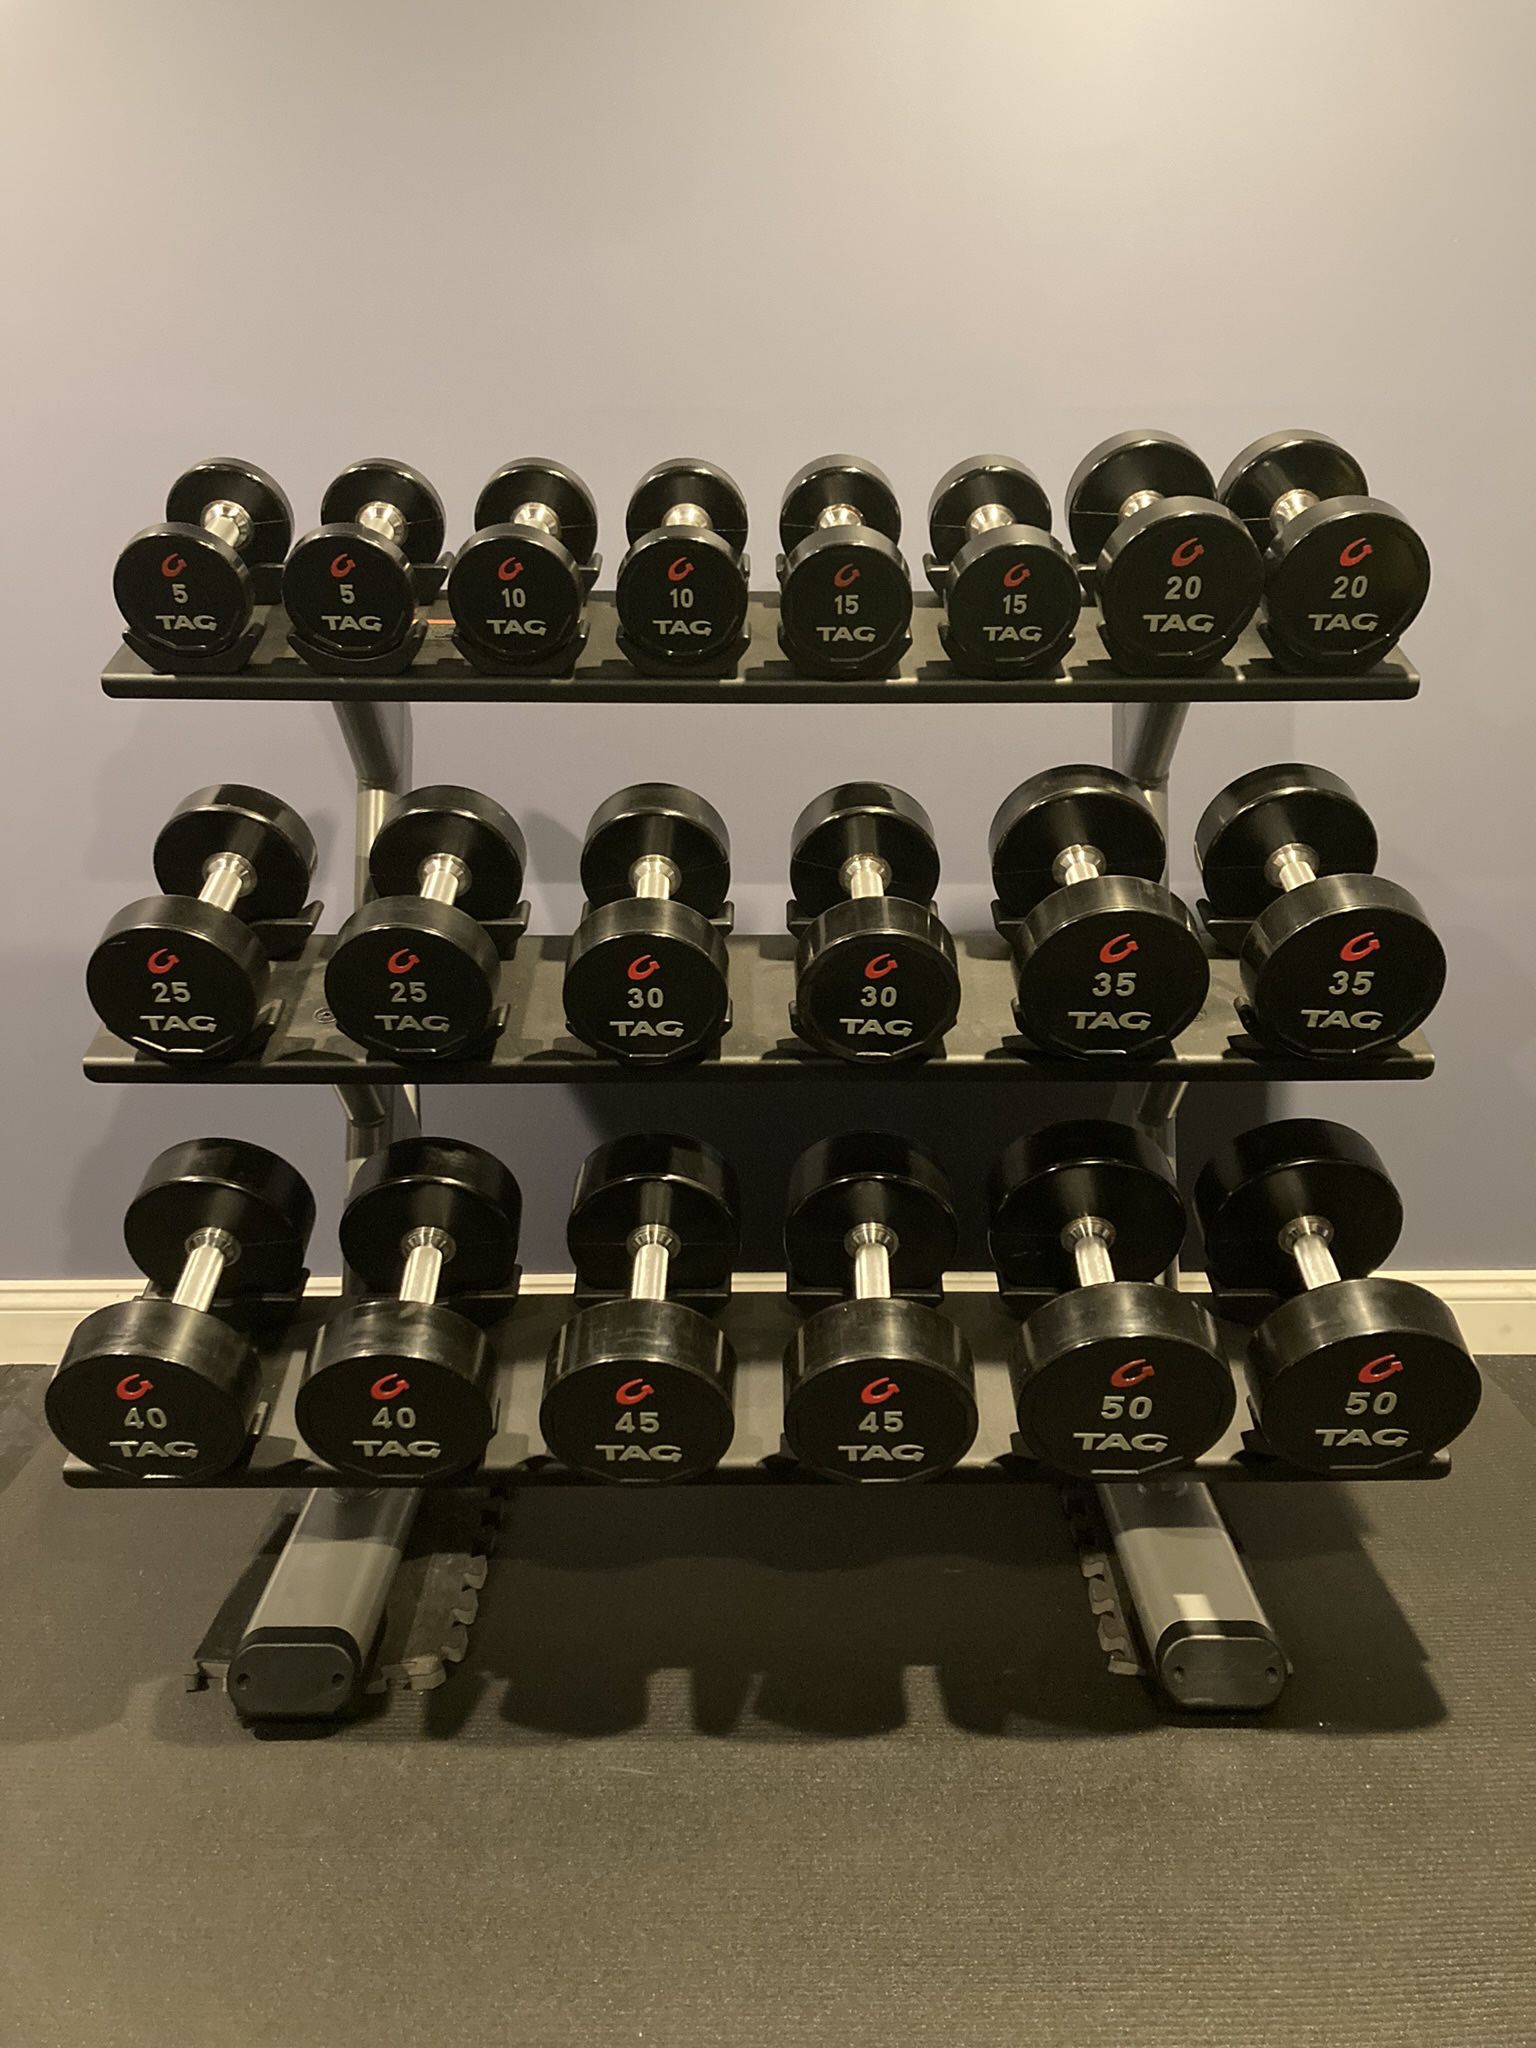 TAG Urethane Dumbbells Complete 5-50 Lb Set With 3-tier Precor Rack - Retails for Over $4,000